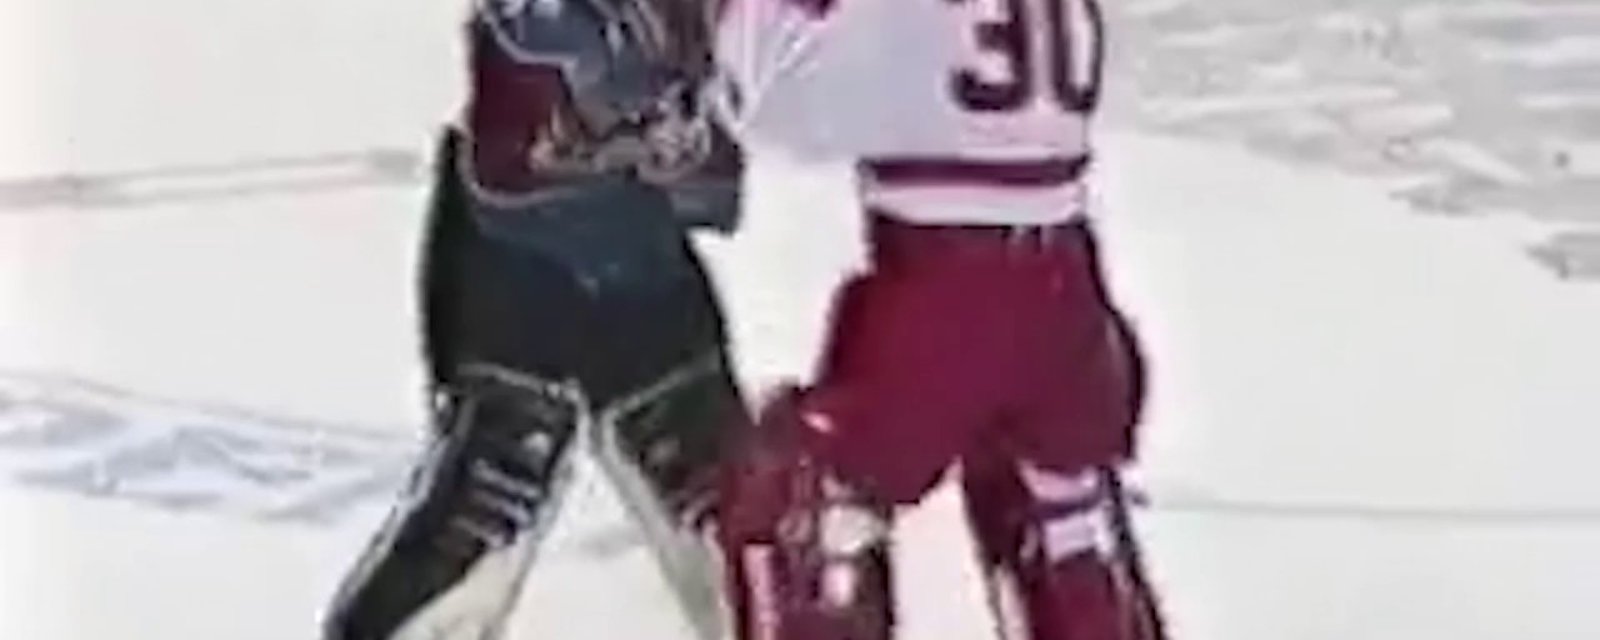 VINTAGE : Roy-Osgood. One of the best goalie fight ever. 